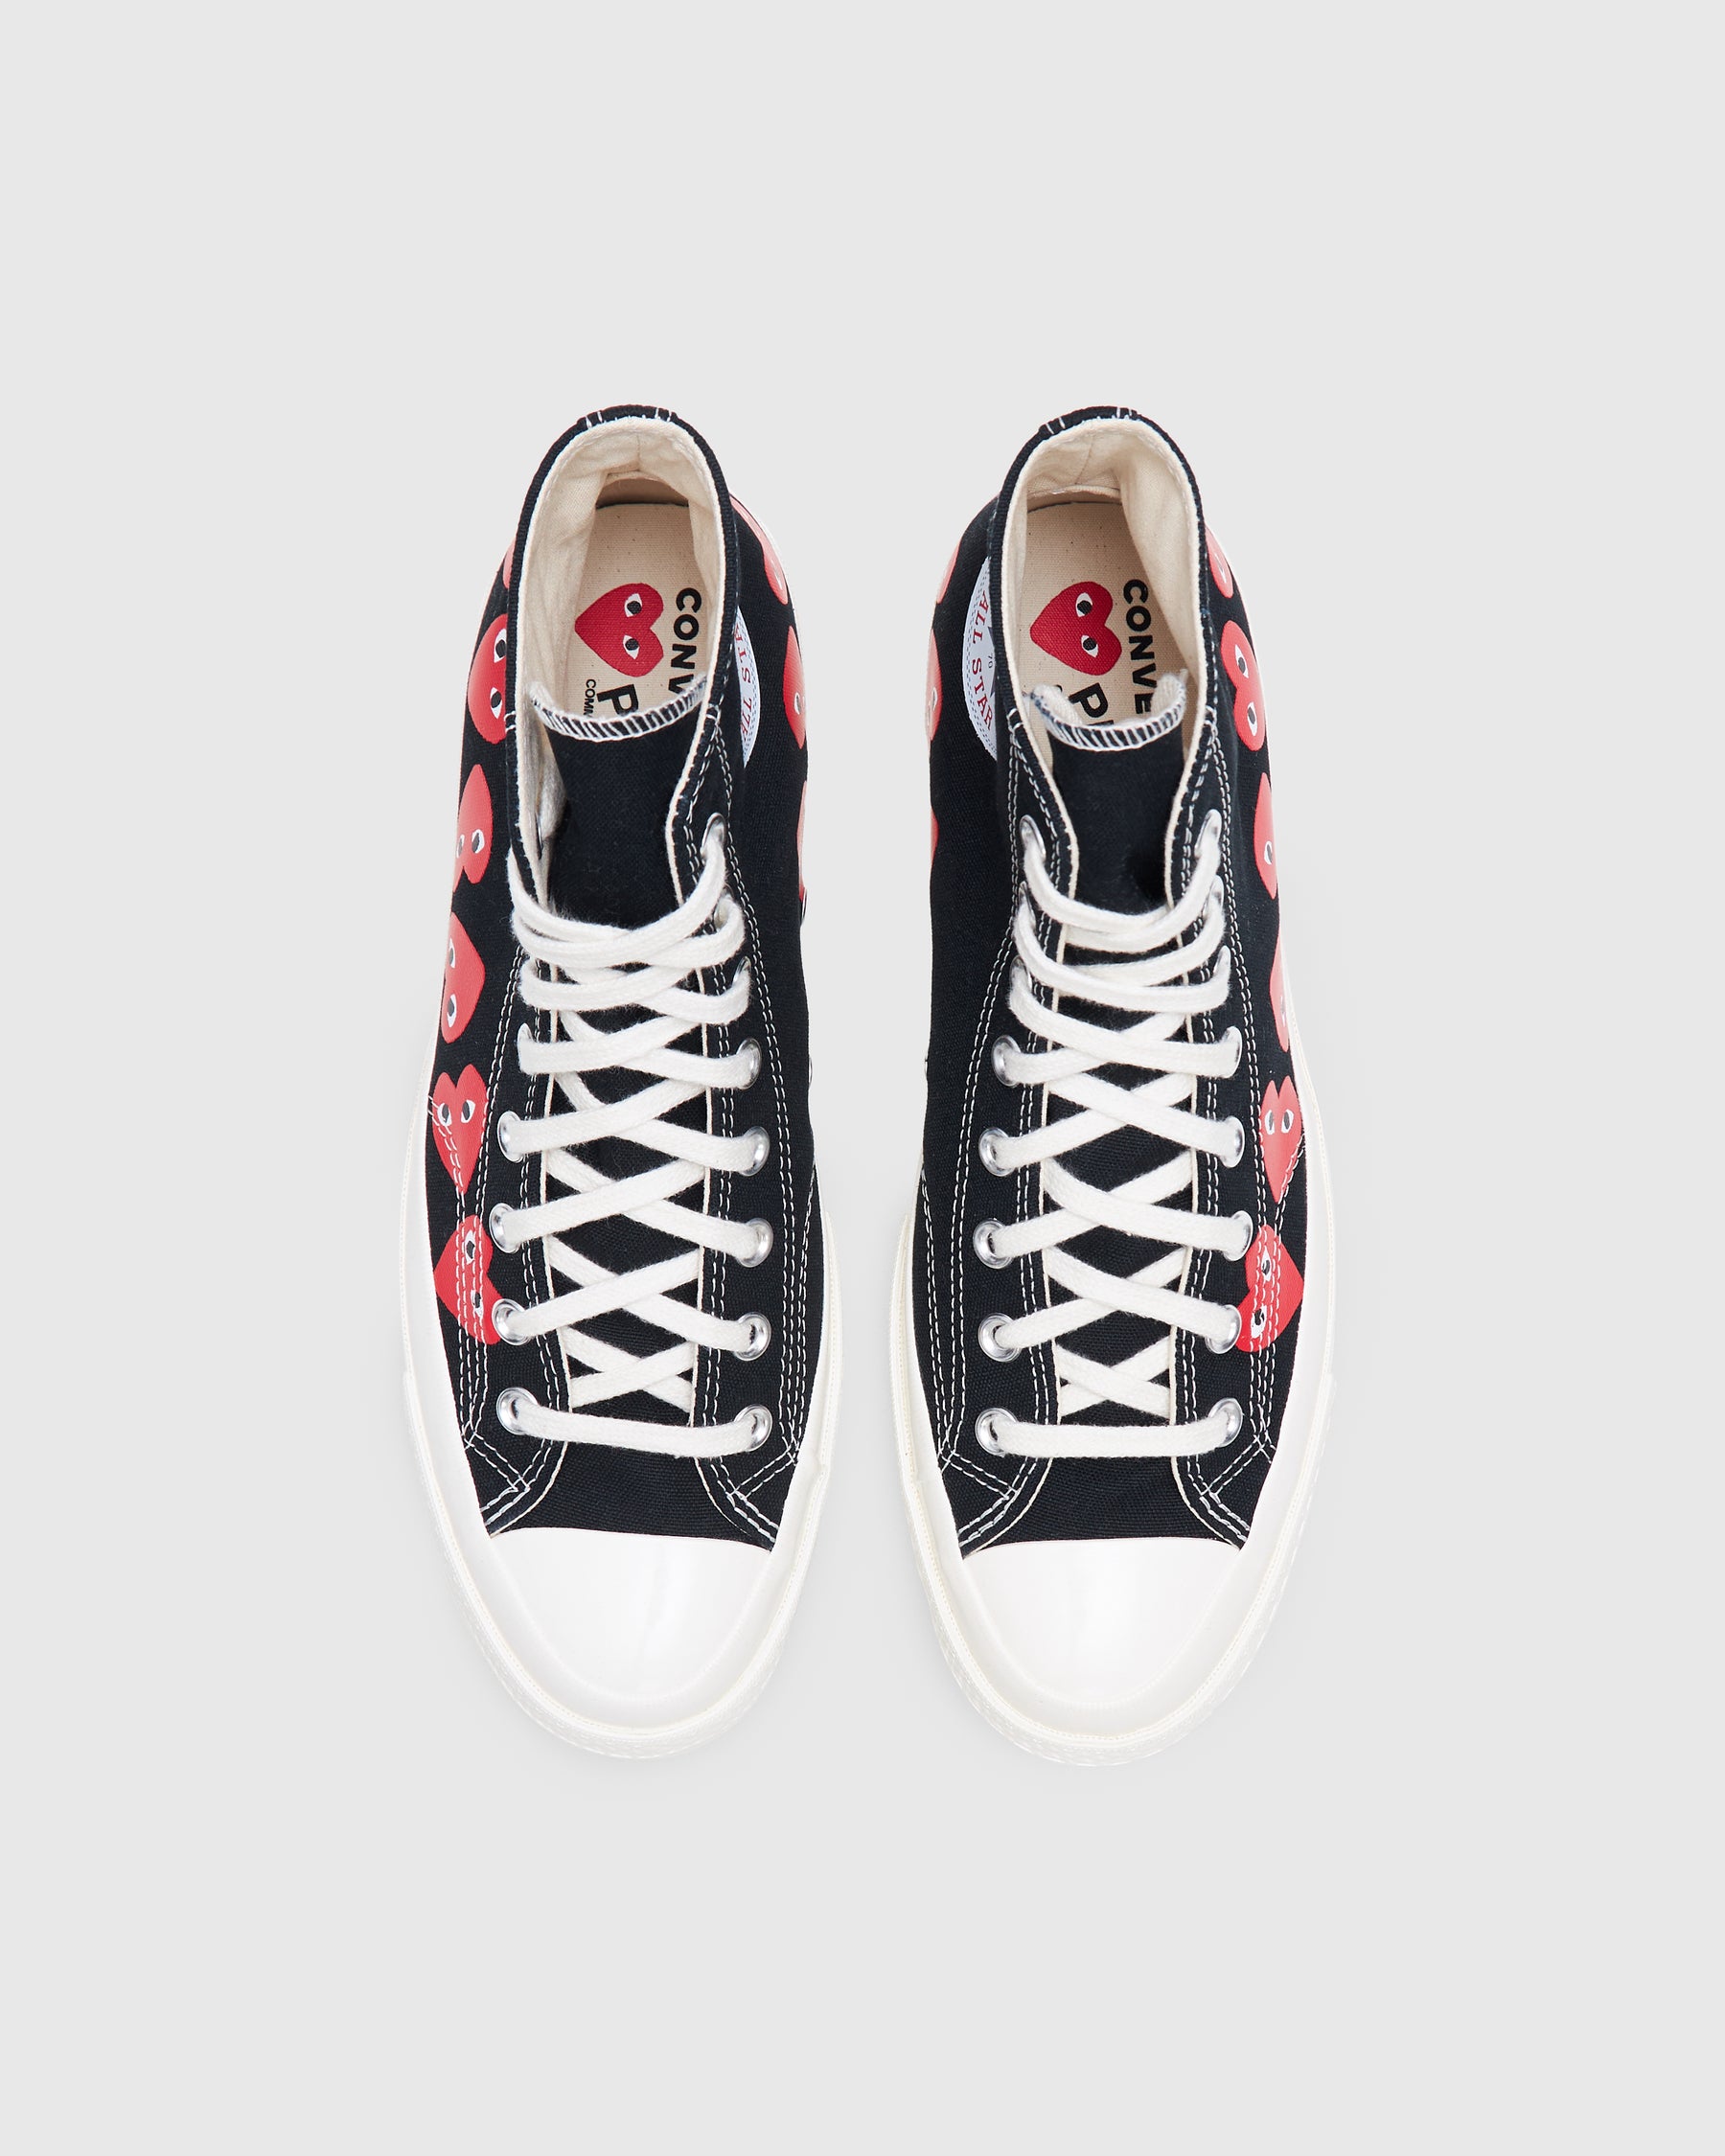 Multi Red Heart Chuck Taylor All Star '70 High in Black